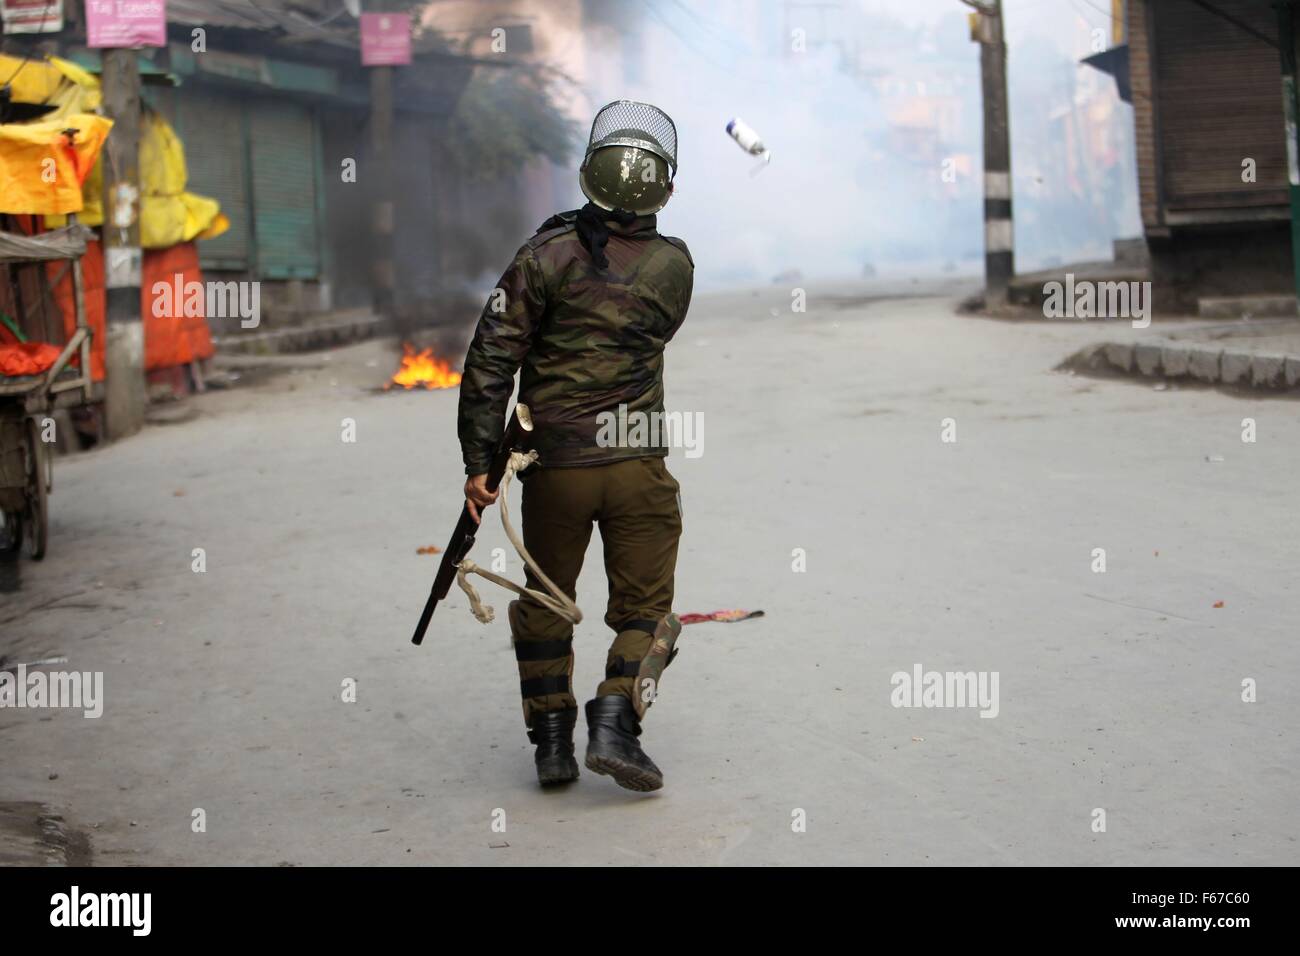 (151113) -- SRINAGAR, Nov. 13, 2015 (Xinhua) -- An Indian policeman throws a stun shell at Kashmiri protesters during a protest in Srinagar, summer capital of Indian-controlled Kashmir, Nov. 13, 2015. Indian police fired dozens of tear smoke shells and rubber bullets as they clashed with Kashmiri protesters during a protest following Friday congregation prayers against the killing of 22-year-old student Gowhar Nazir Dar in firing incident by Indian paramilitary troopers. The protest call was given by hard-line Kashmiri separatist leader Syed Ali Shah Geelani. (Xinhua/Javed Dar) (zjy) Stock Photo